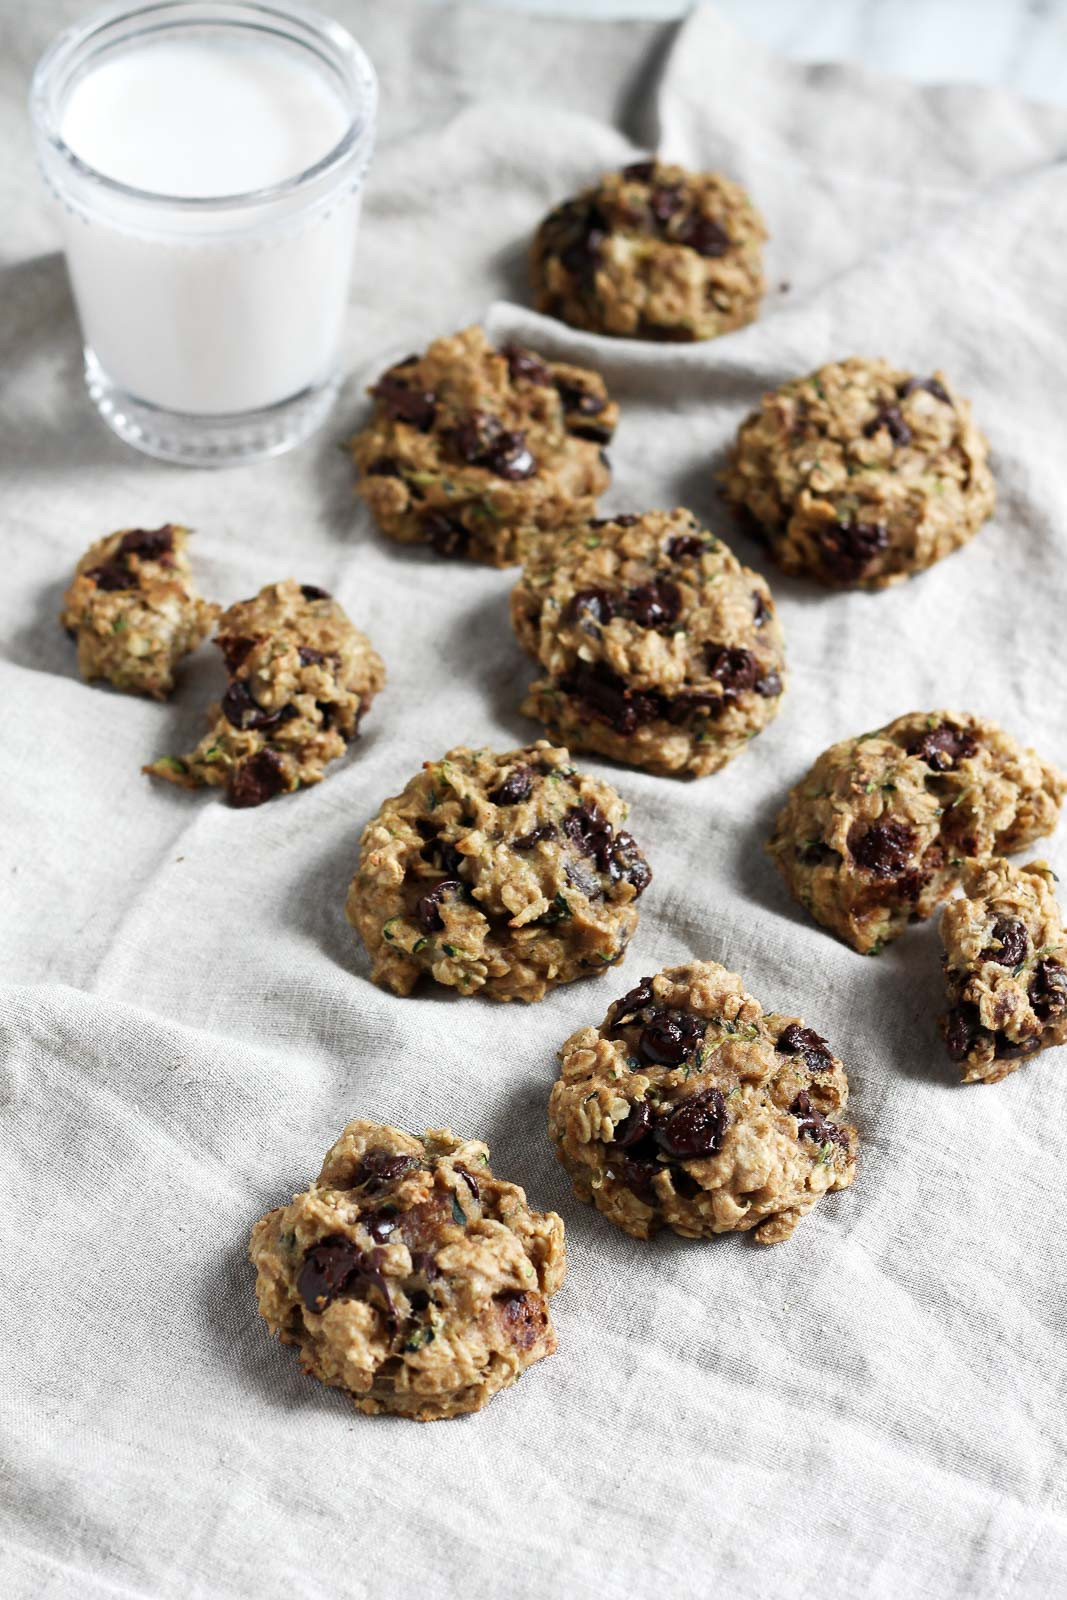 Chocolate Chip Oatmeal Cookies Healthy
 Healthy Chocolate Chip Zucchini Oatmeal Cookies